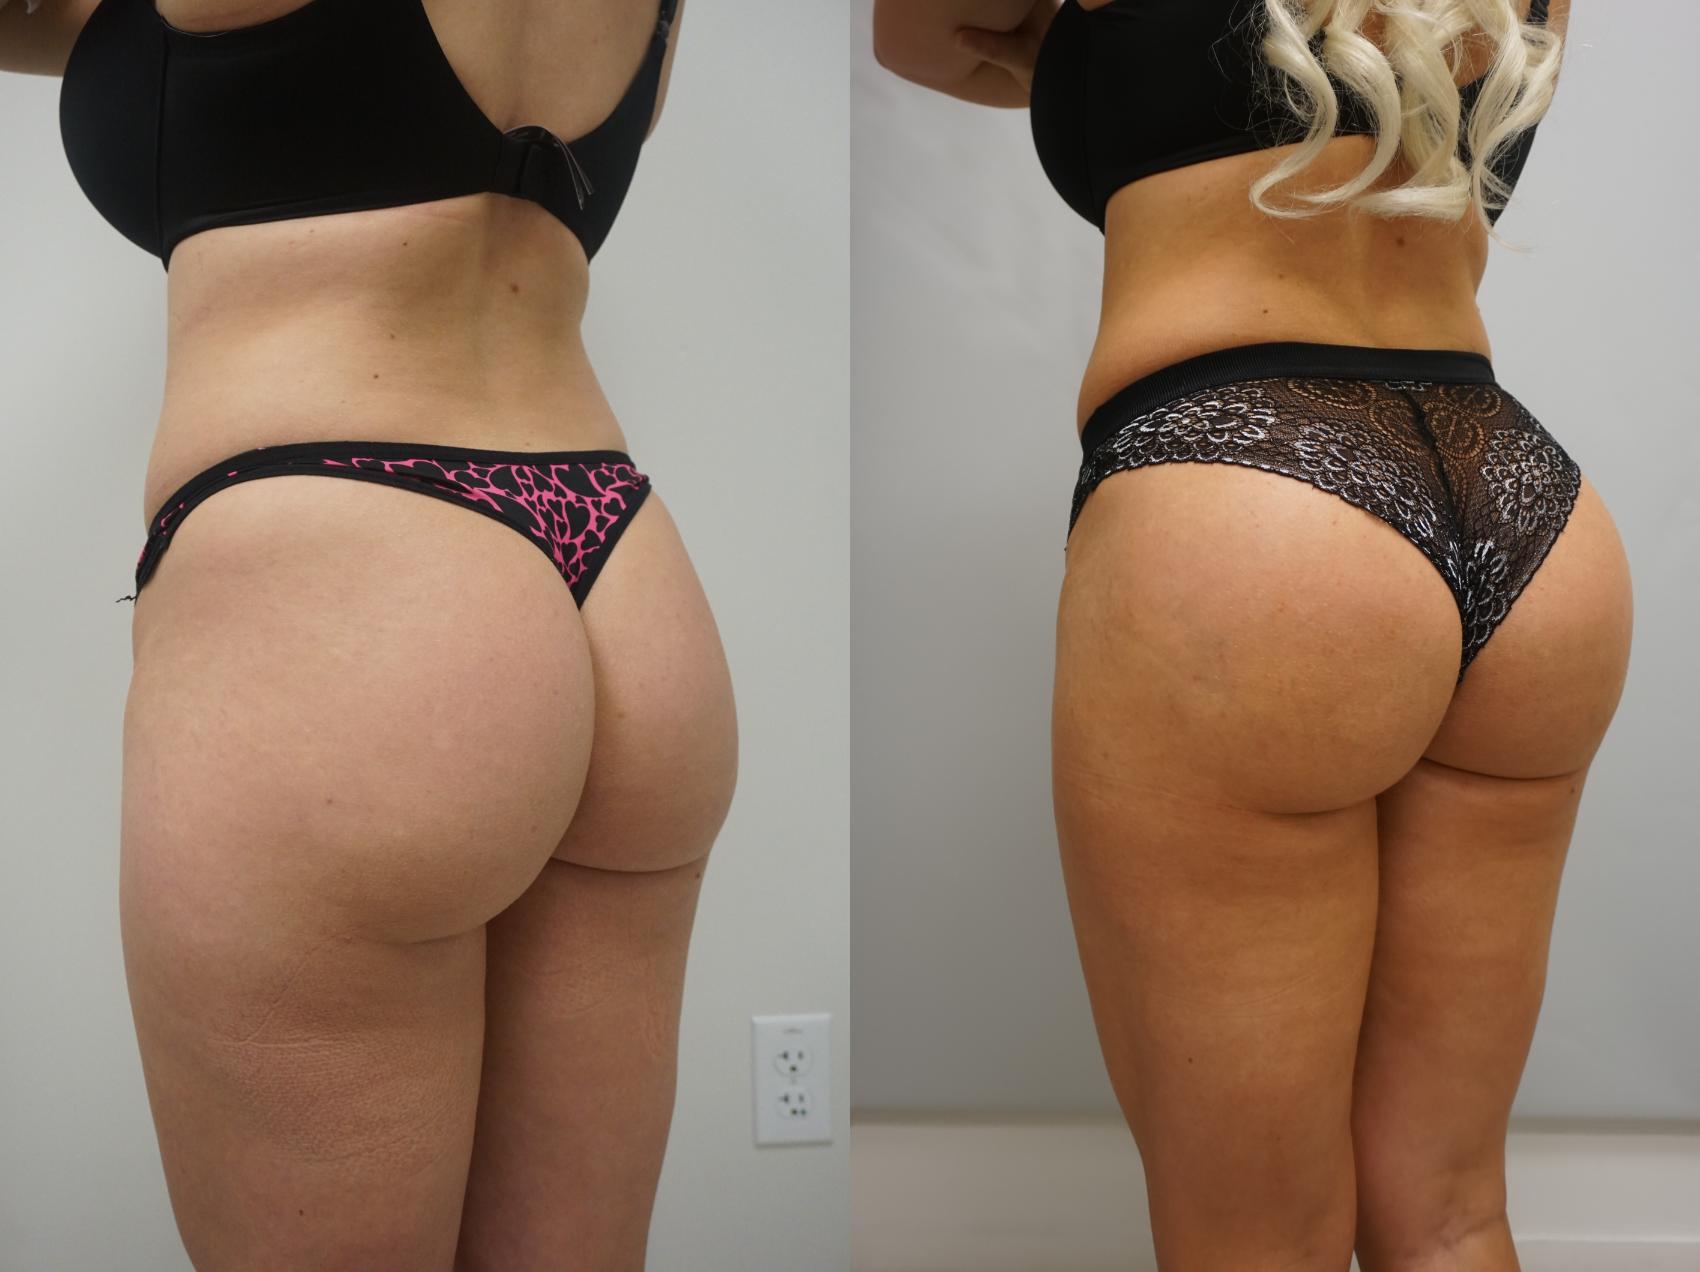 Buttock augmentation, sometimes referred to as a BBL or Brazilian Butt Lift  using your own fat or implants, can surgically increase the s